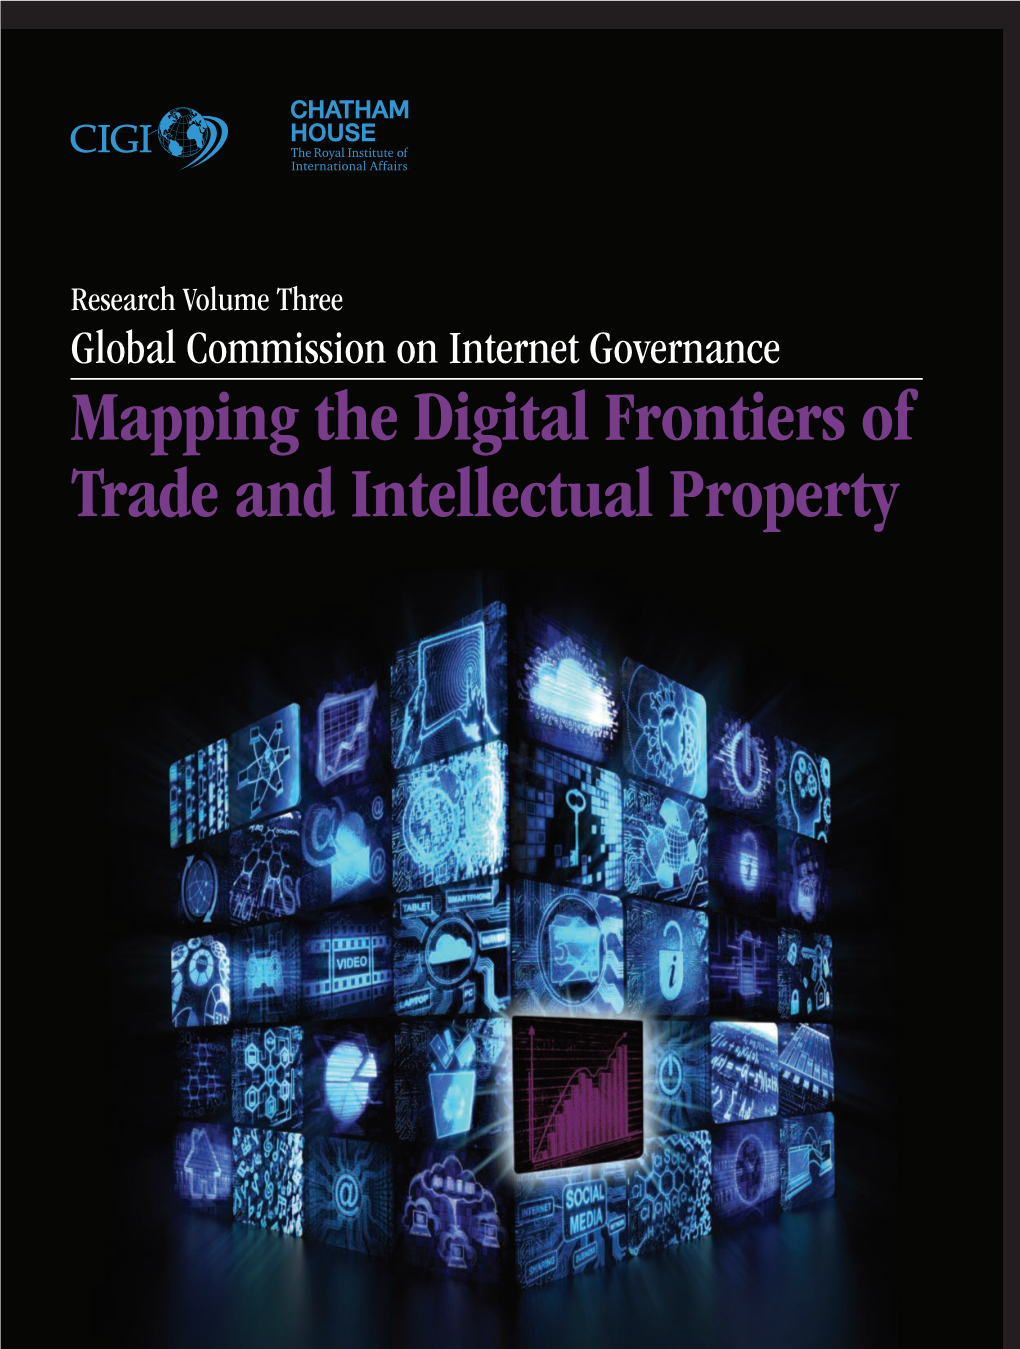 Mapping the Digital Frontiers of Trade and Intellectual Property